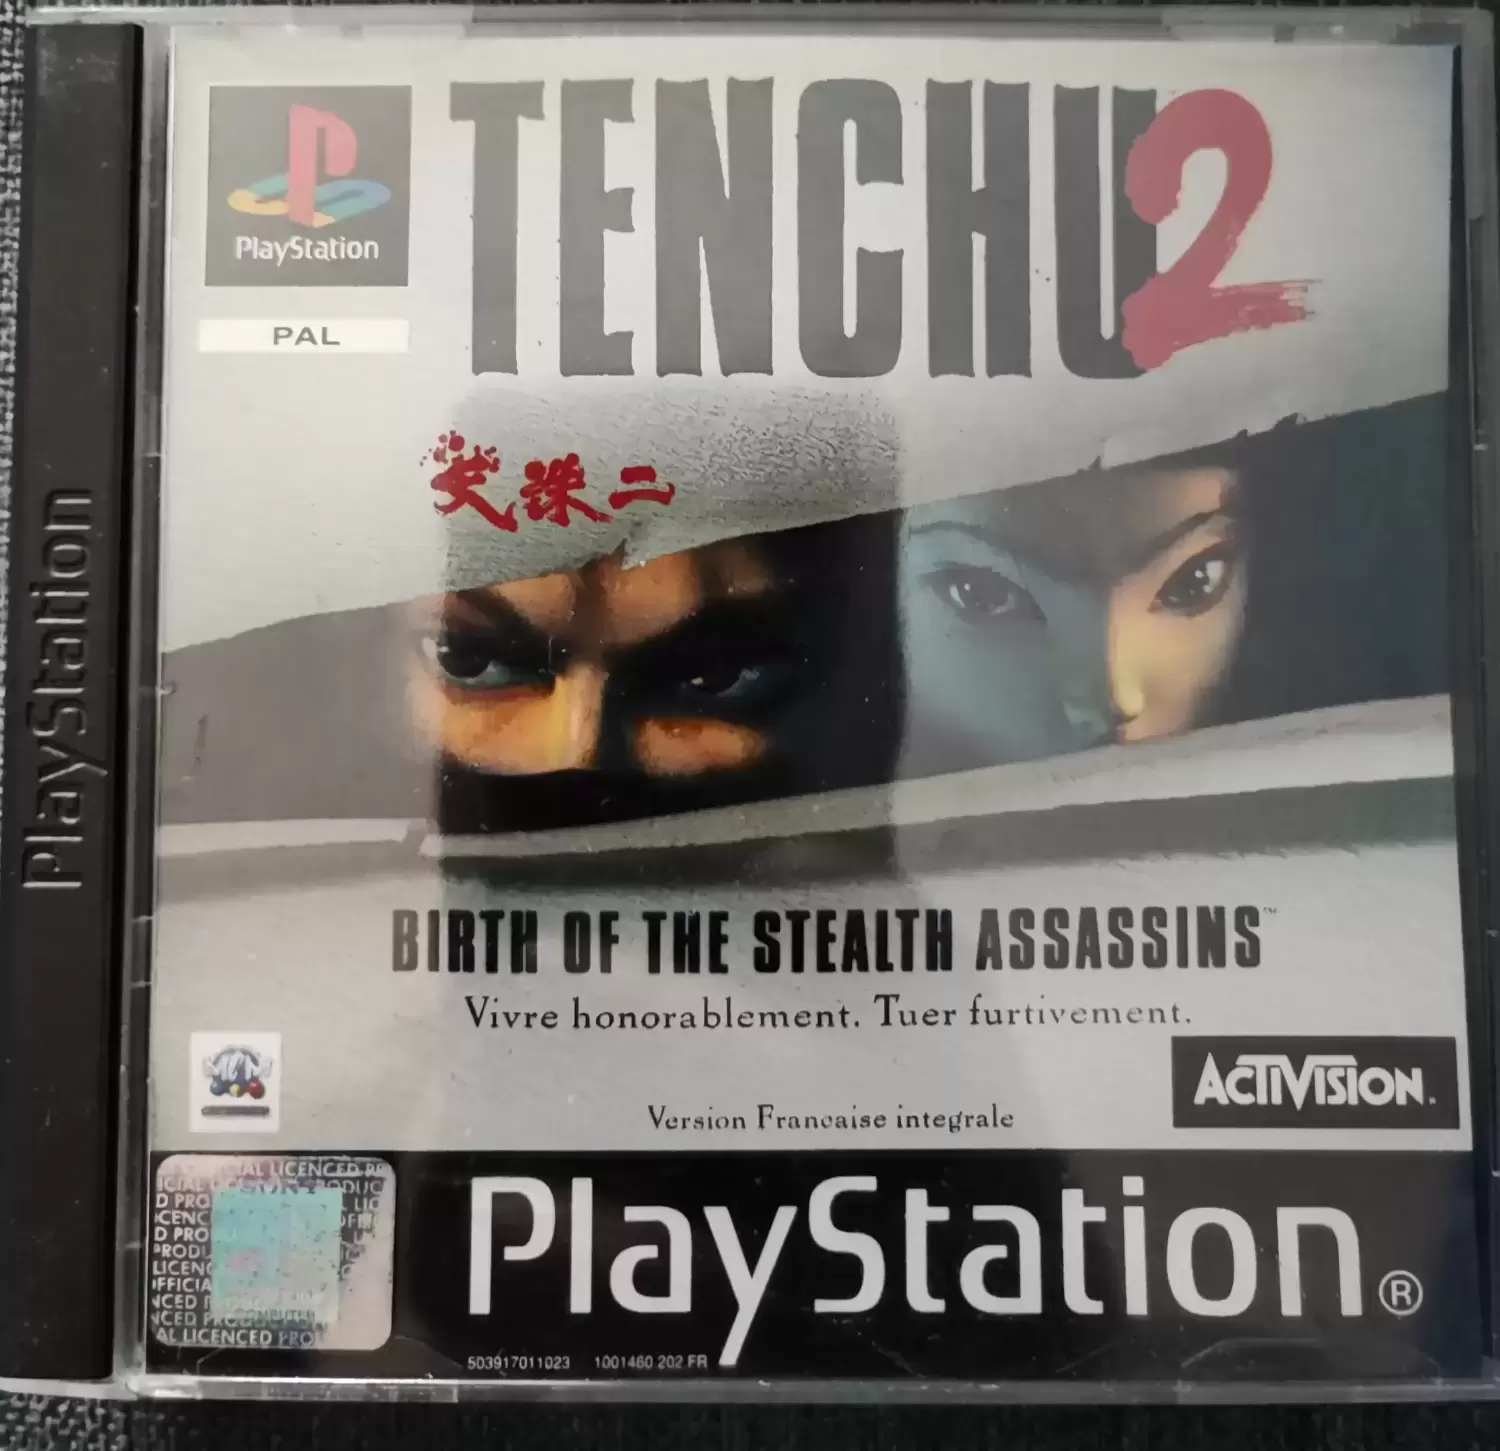 Jeux Playstation PS1 - Tenchu 2 : Birth of the Stealth Assassins